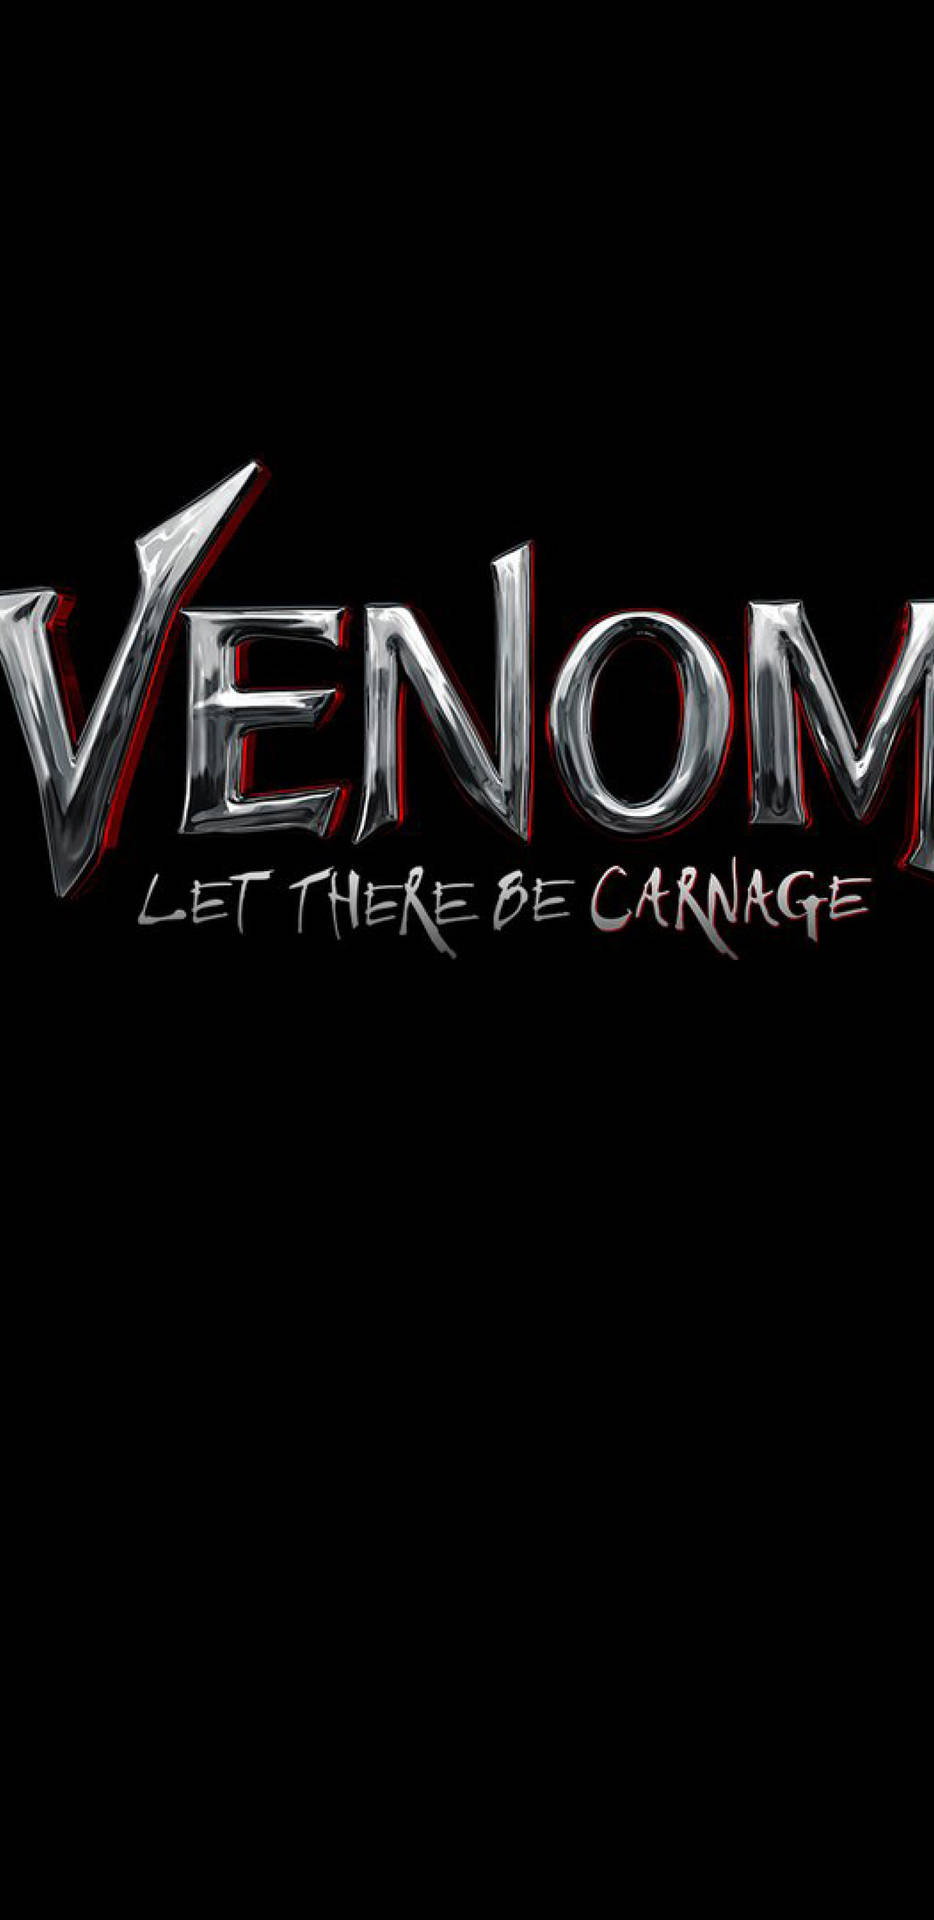 Venom Let There Be Carnage Lettering Background